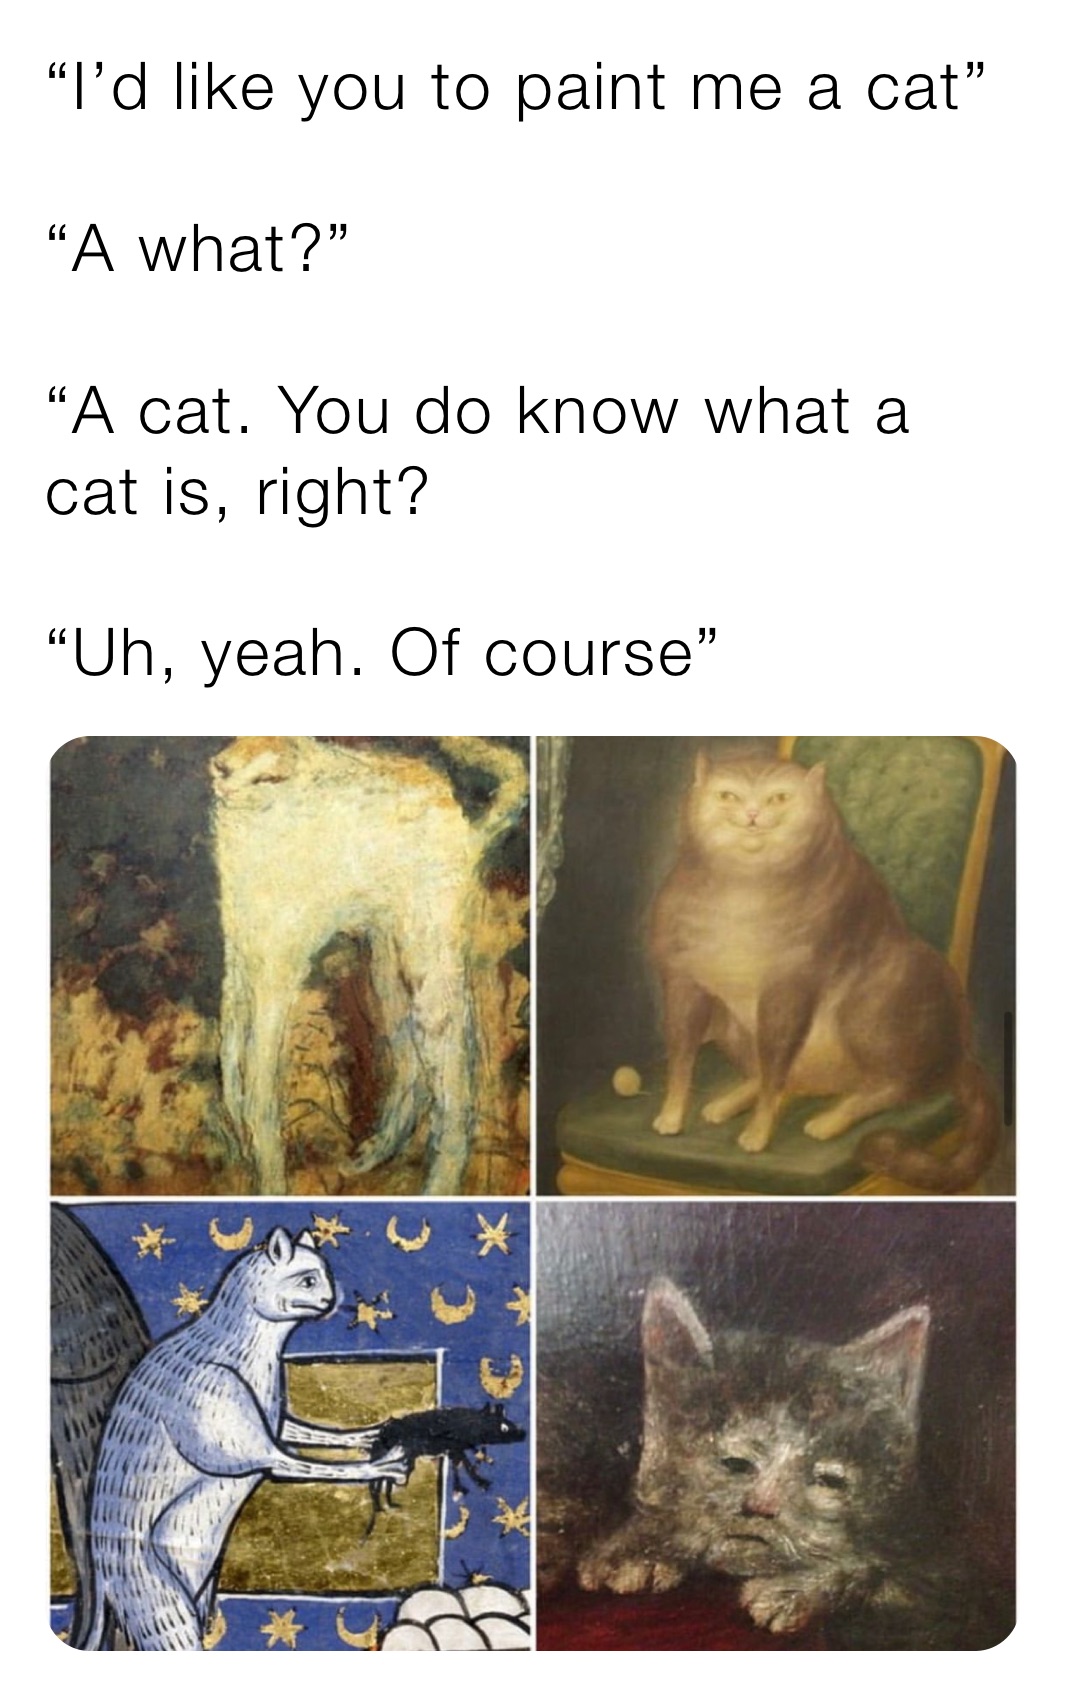 “I’d like you to paint me a cat”

“A what?”

“A cat. You do know what a cat is, right?

“Uh, yeah. Of course”